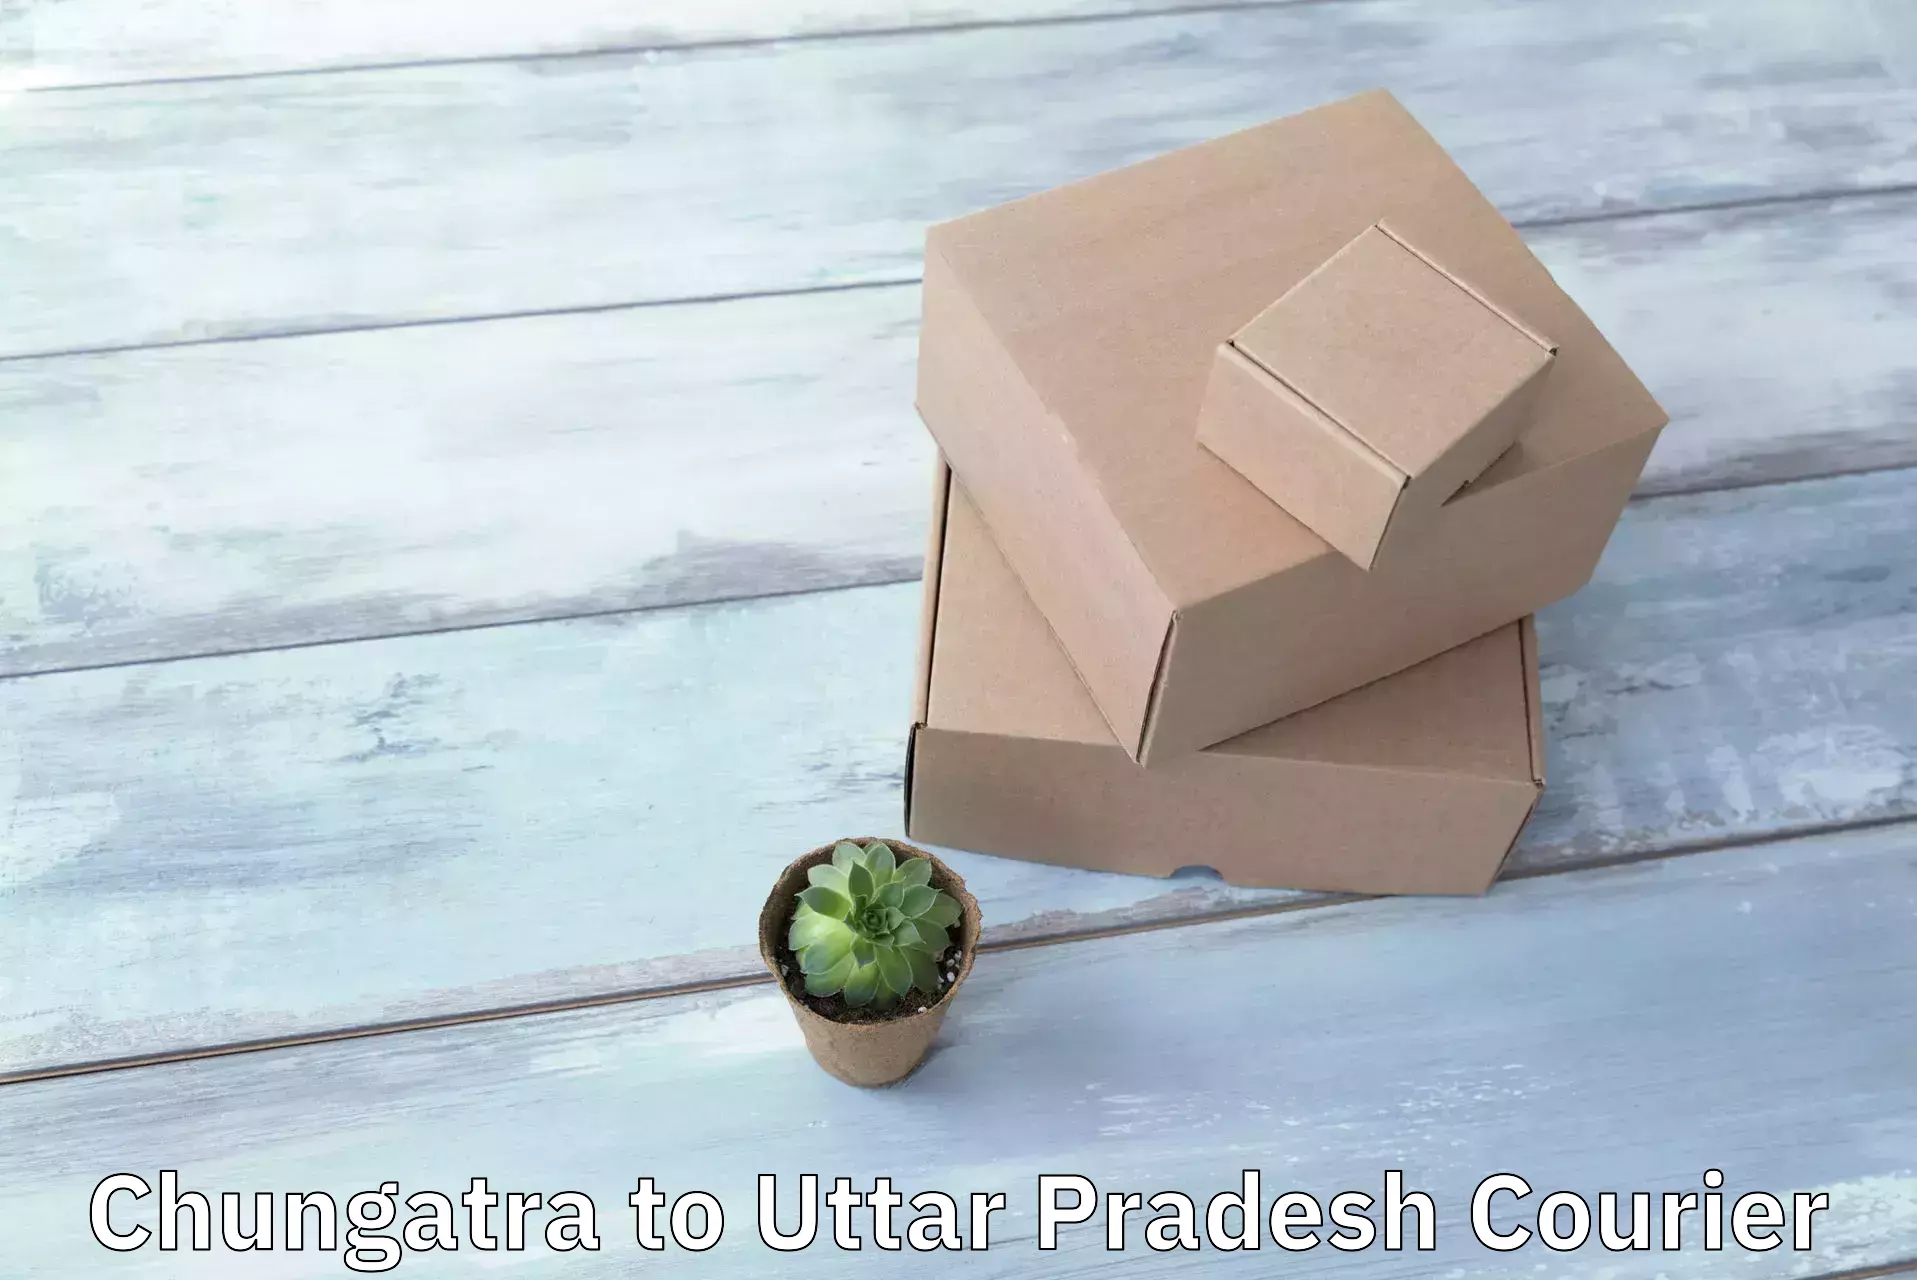 Package delivery network Chungatra to Vrindavan